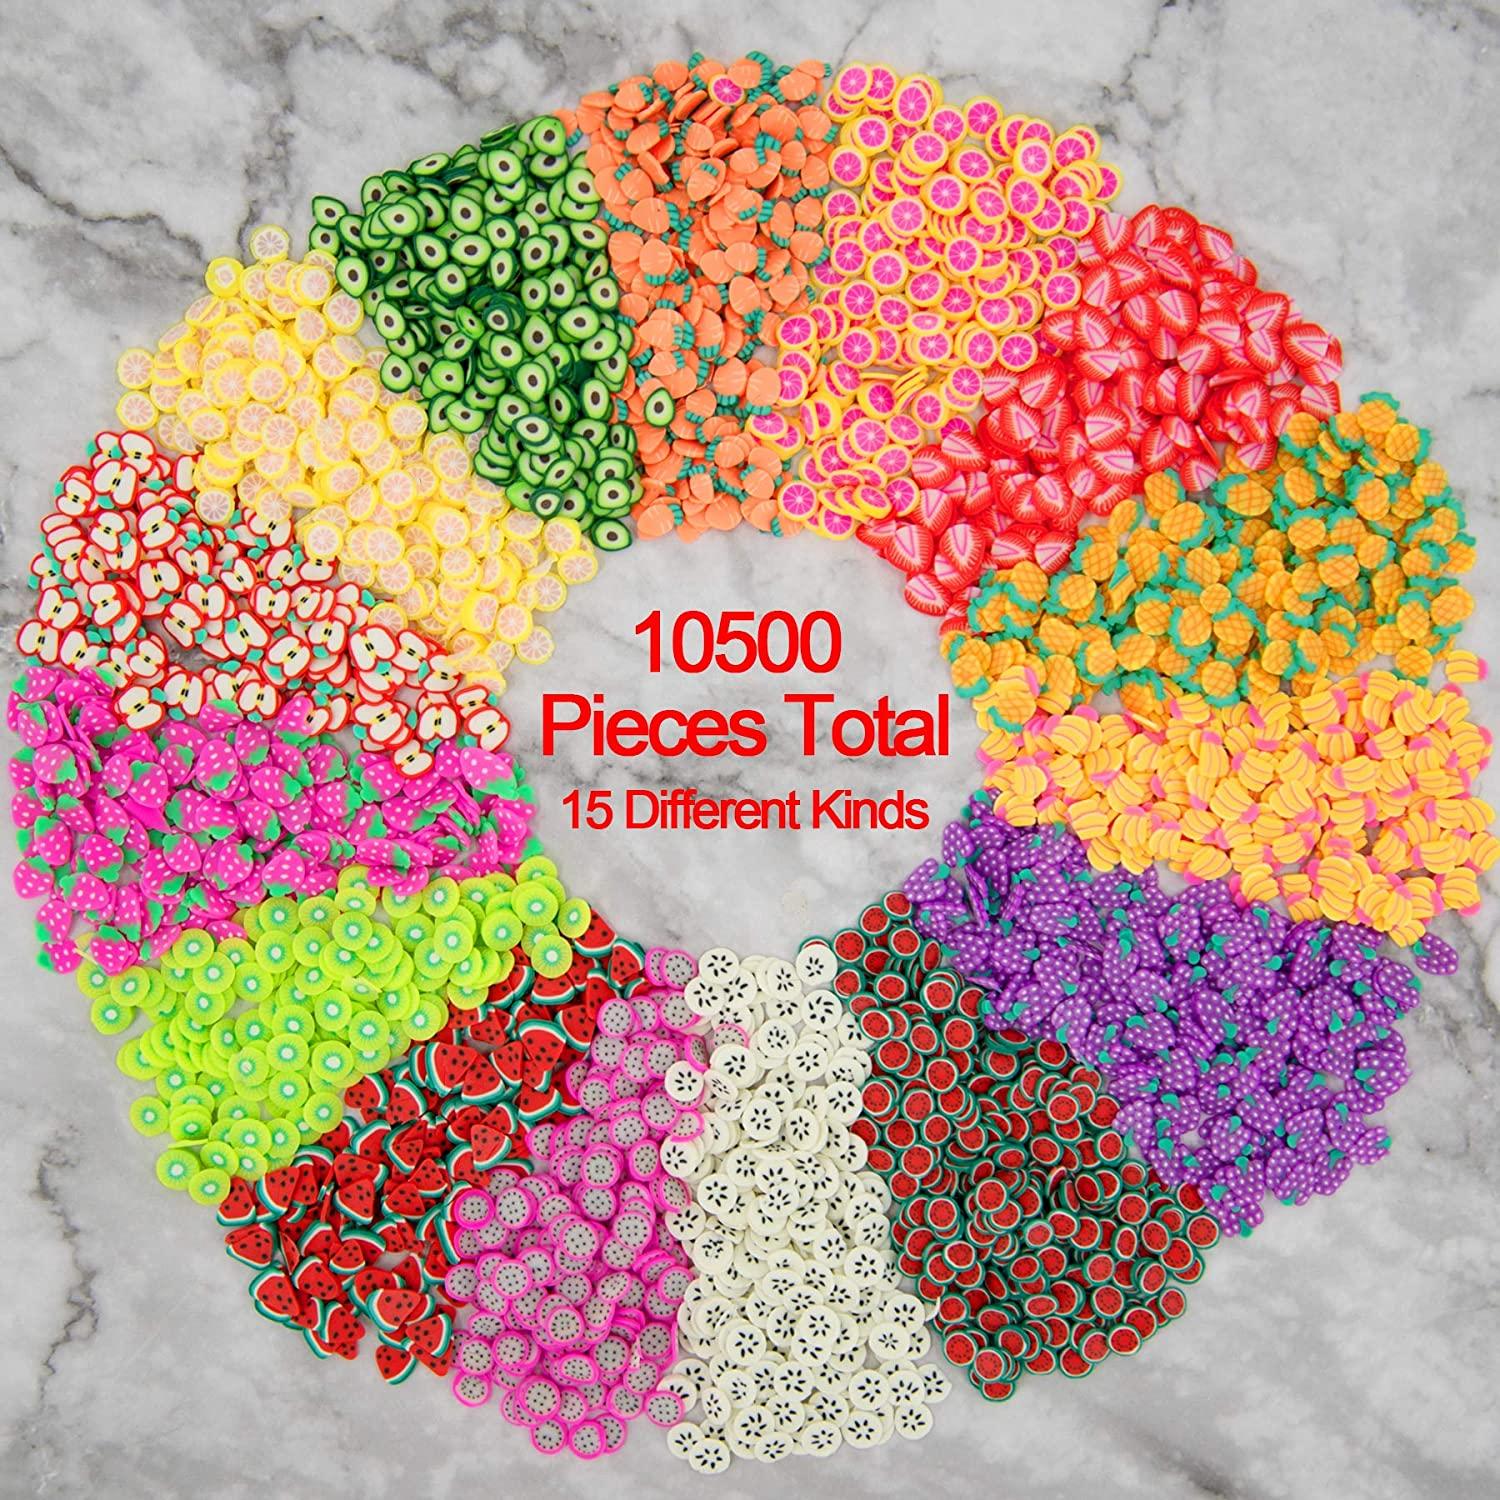 Duufin 10500 Pcs Nail Art Slices Fruits Slices Polymer Nail 3D Slice  Colorful DIY Nail Art Supplies with a Tweezers for DIY Crafts, Slime Making  and Cellphone Decoration